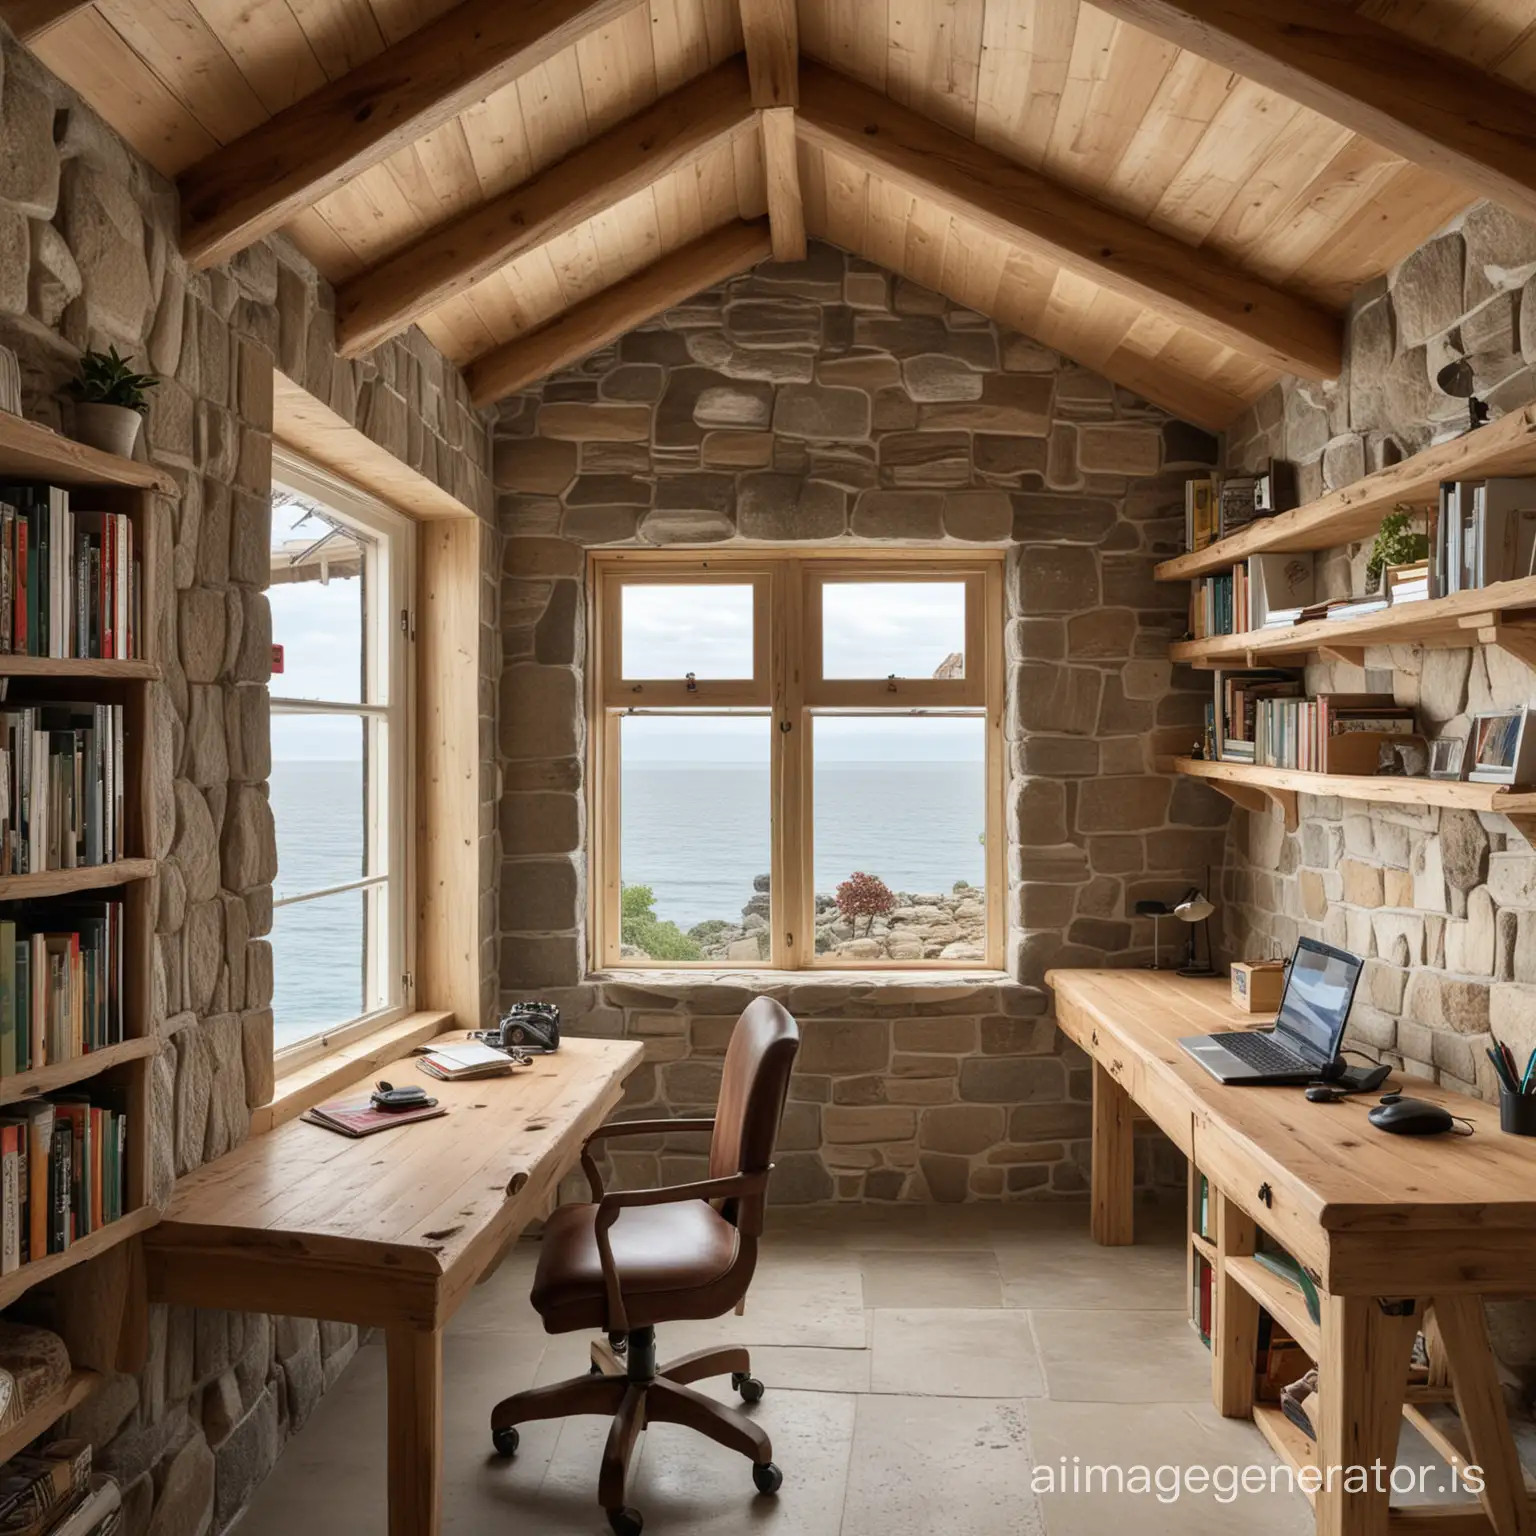 Rustic 160 square foot office in a stone sea cottage with only one small window along the south wall looking out towards the sea, high slanted wood ceiling with fan, bookshelves along the north wall